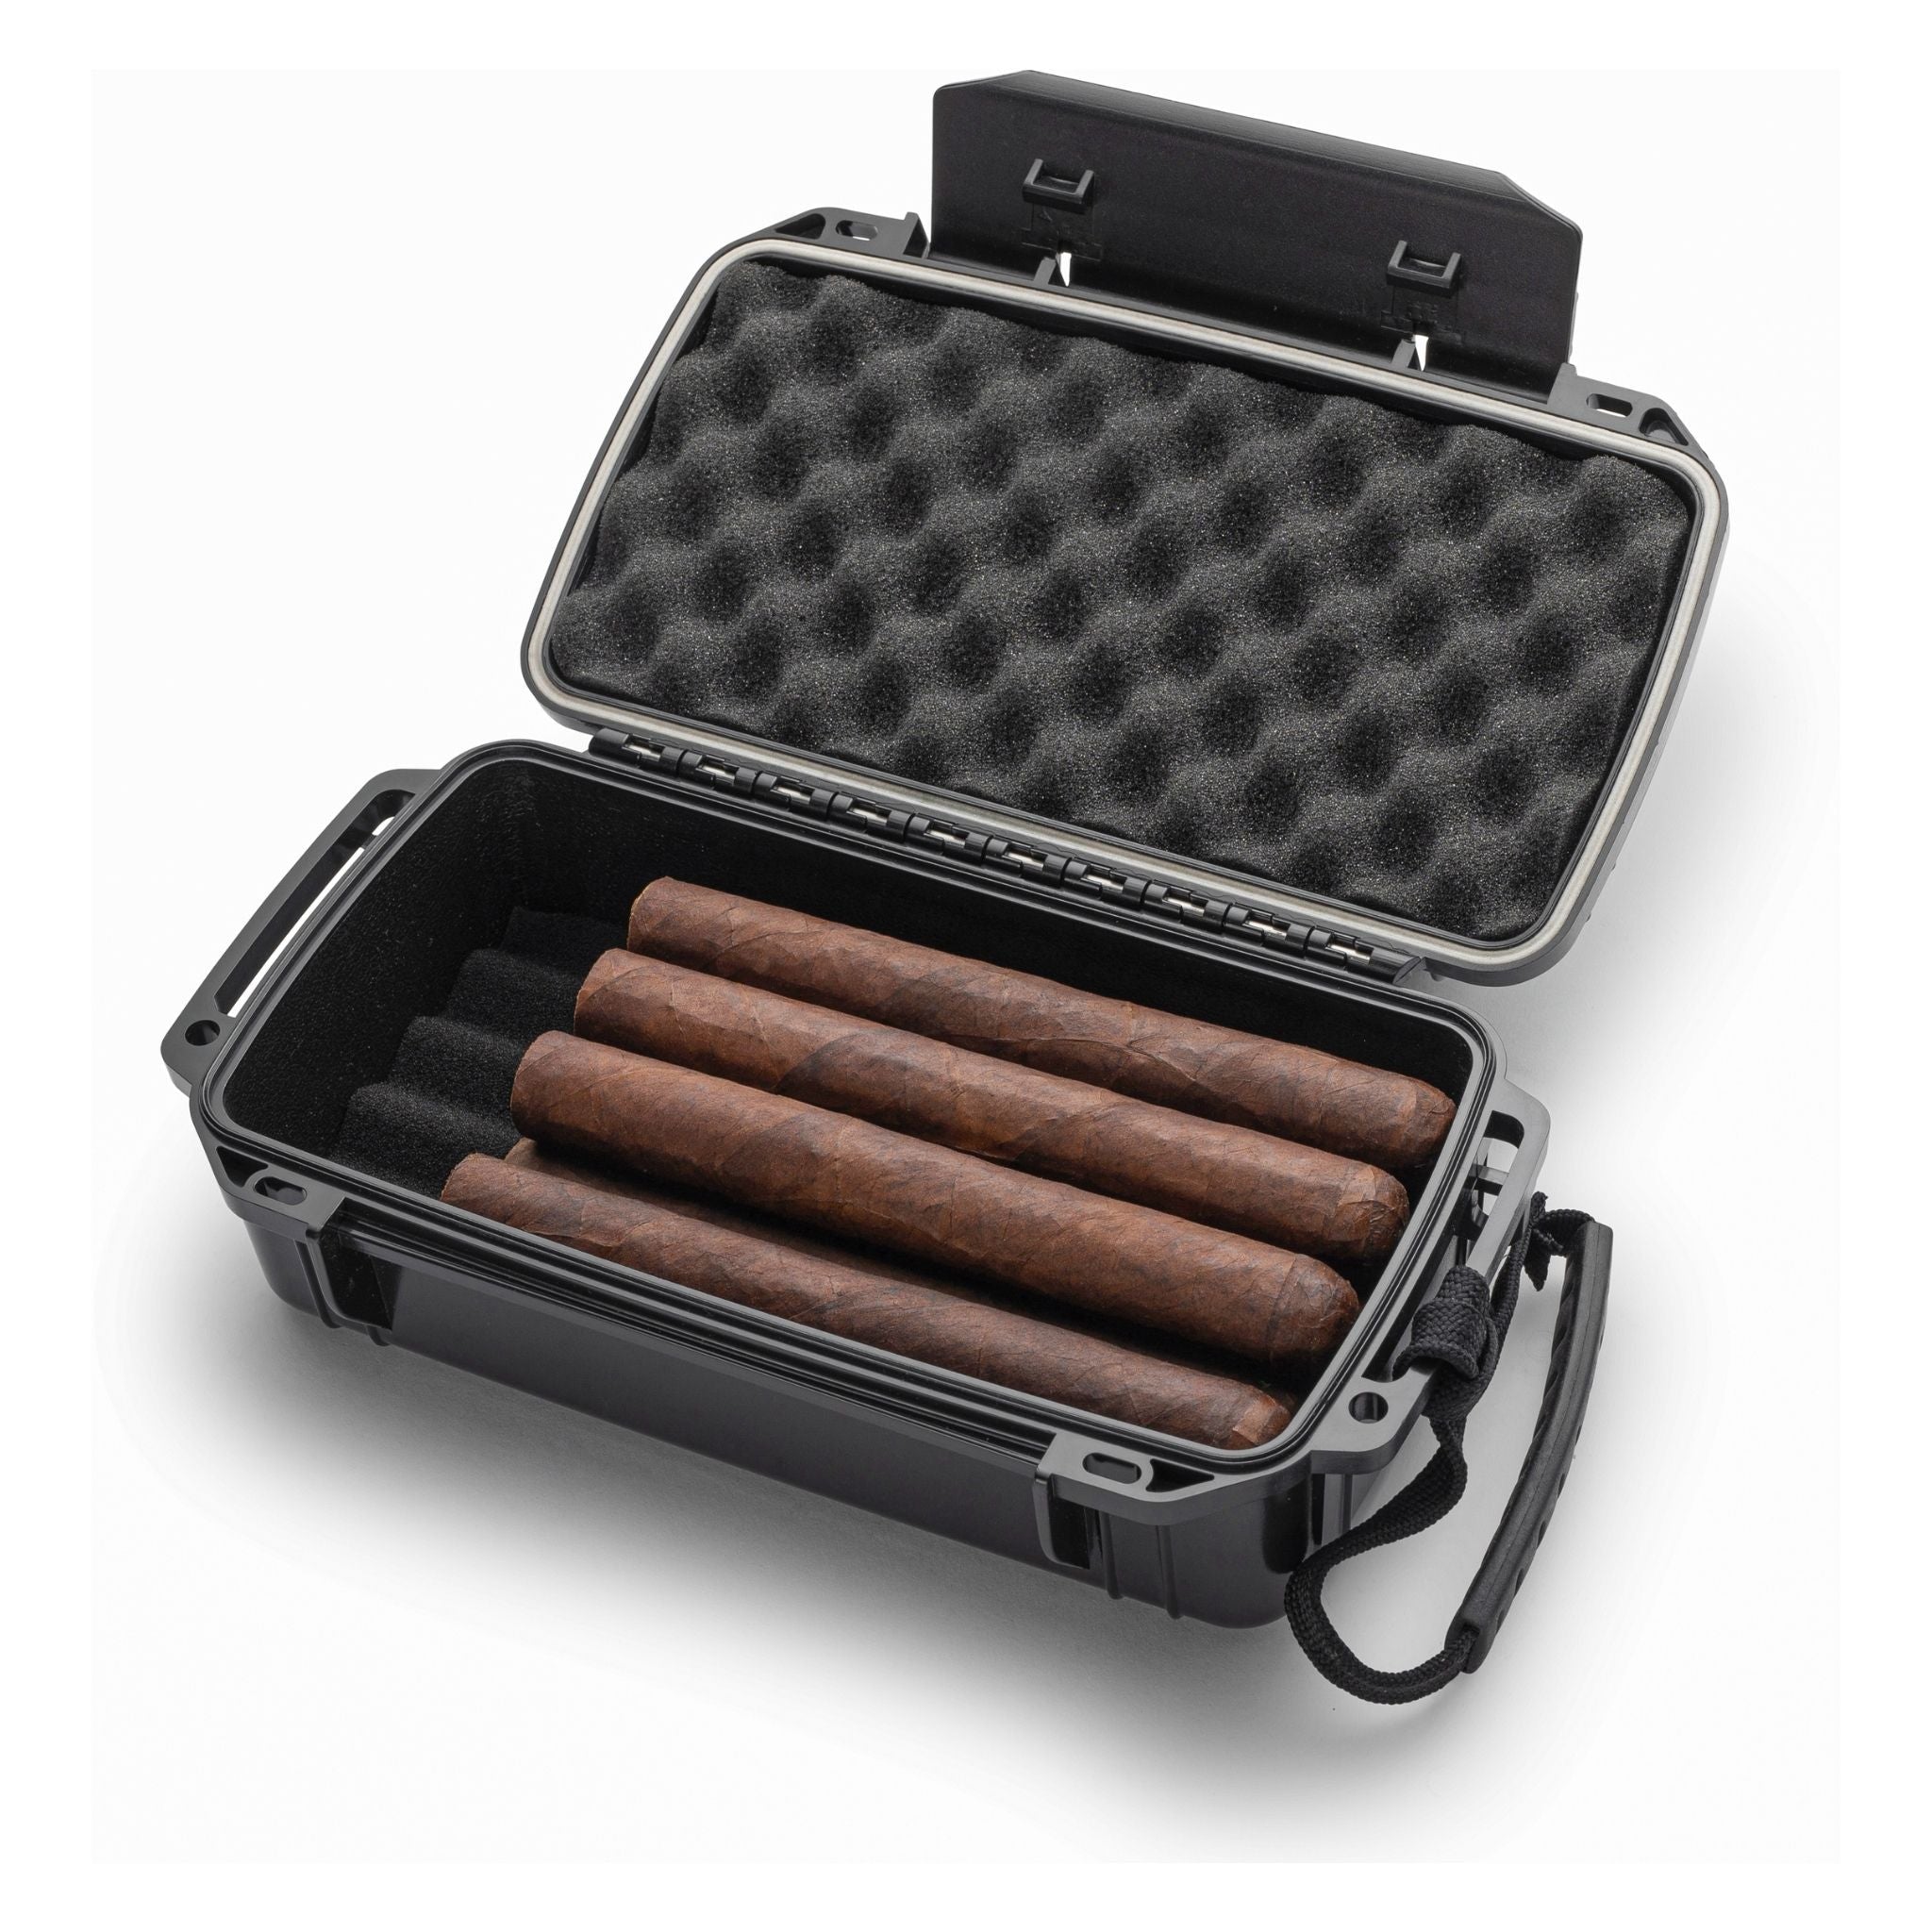 Cigar Travel Humidor Case 15 Count - Waterproof, Rugged, Crushproof - Black  - Holds Up To 